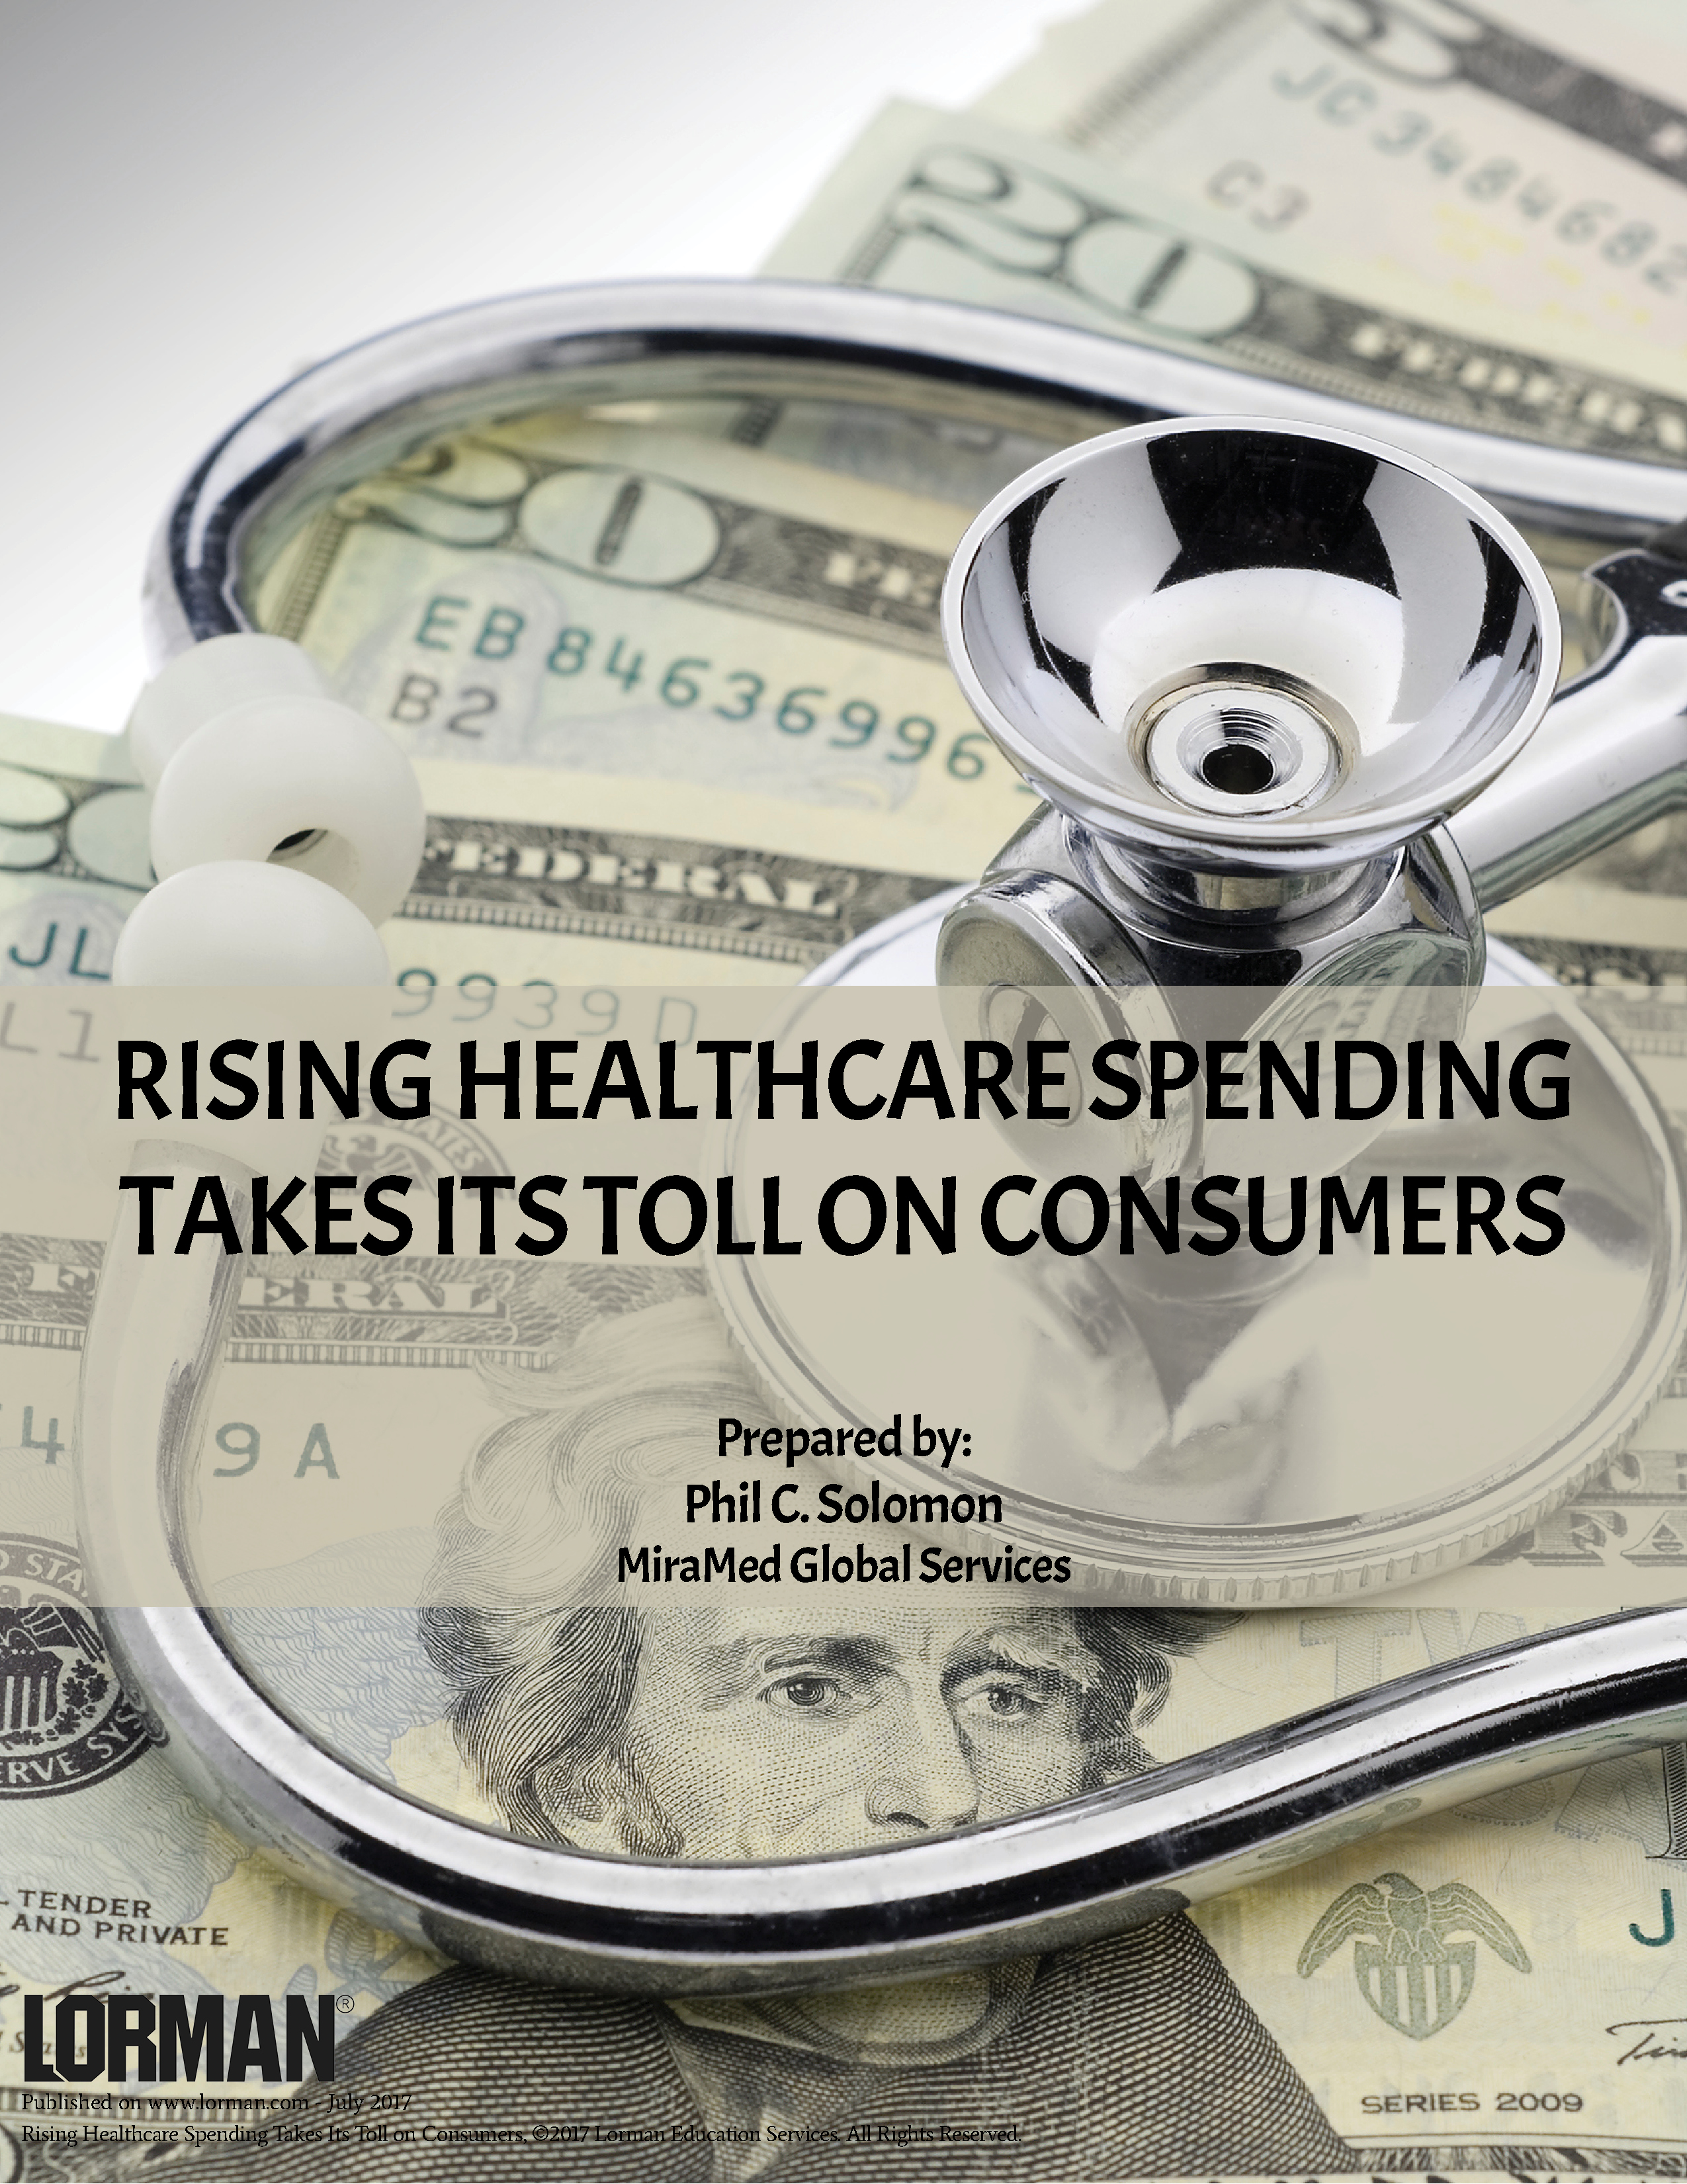 Rising Healthcare Spending Takes Its Toll on Consumers